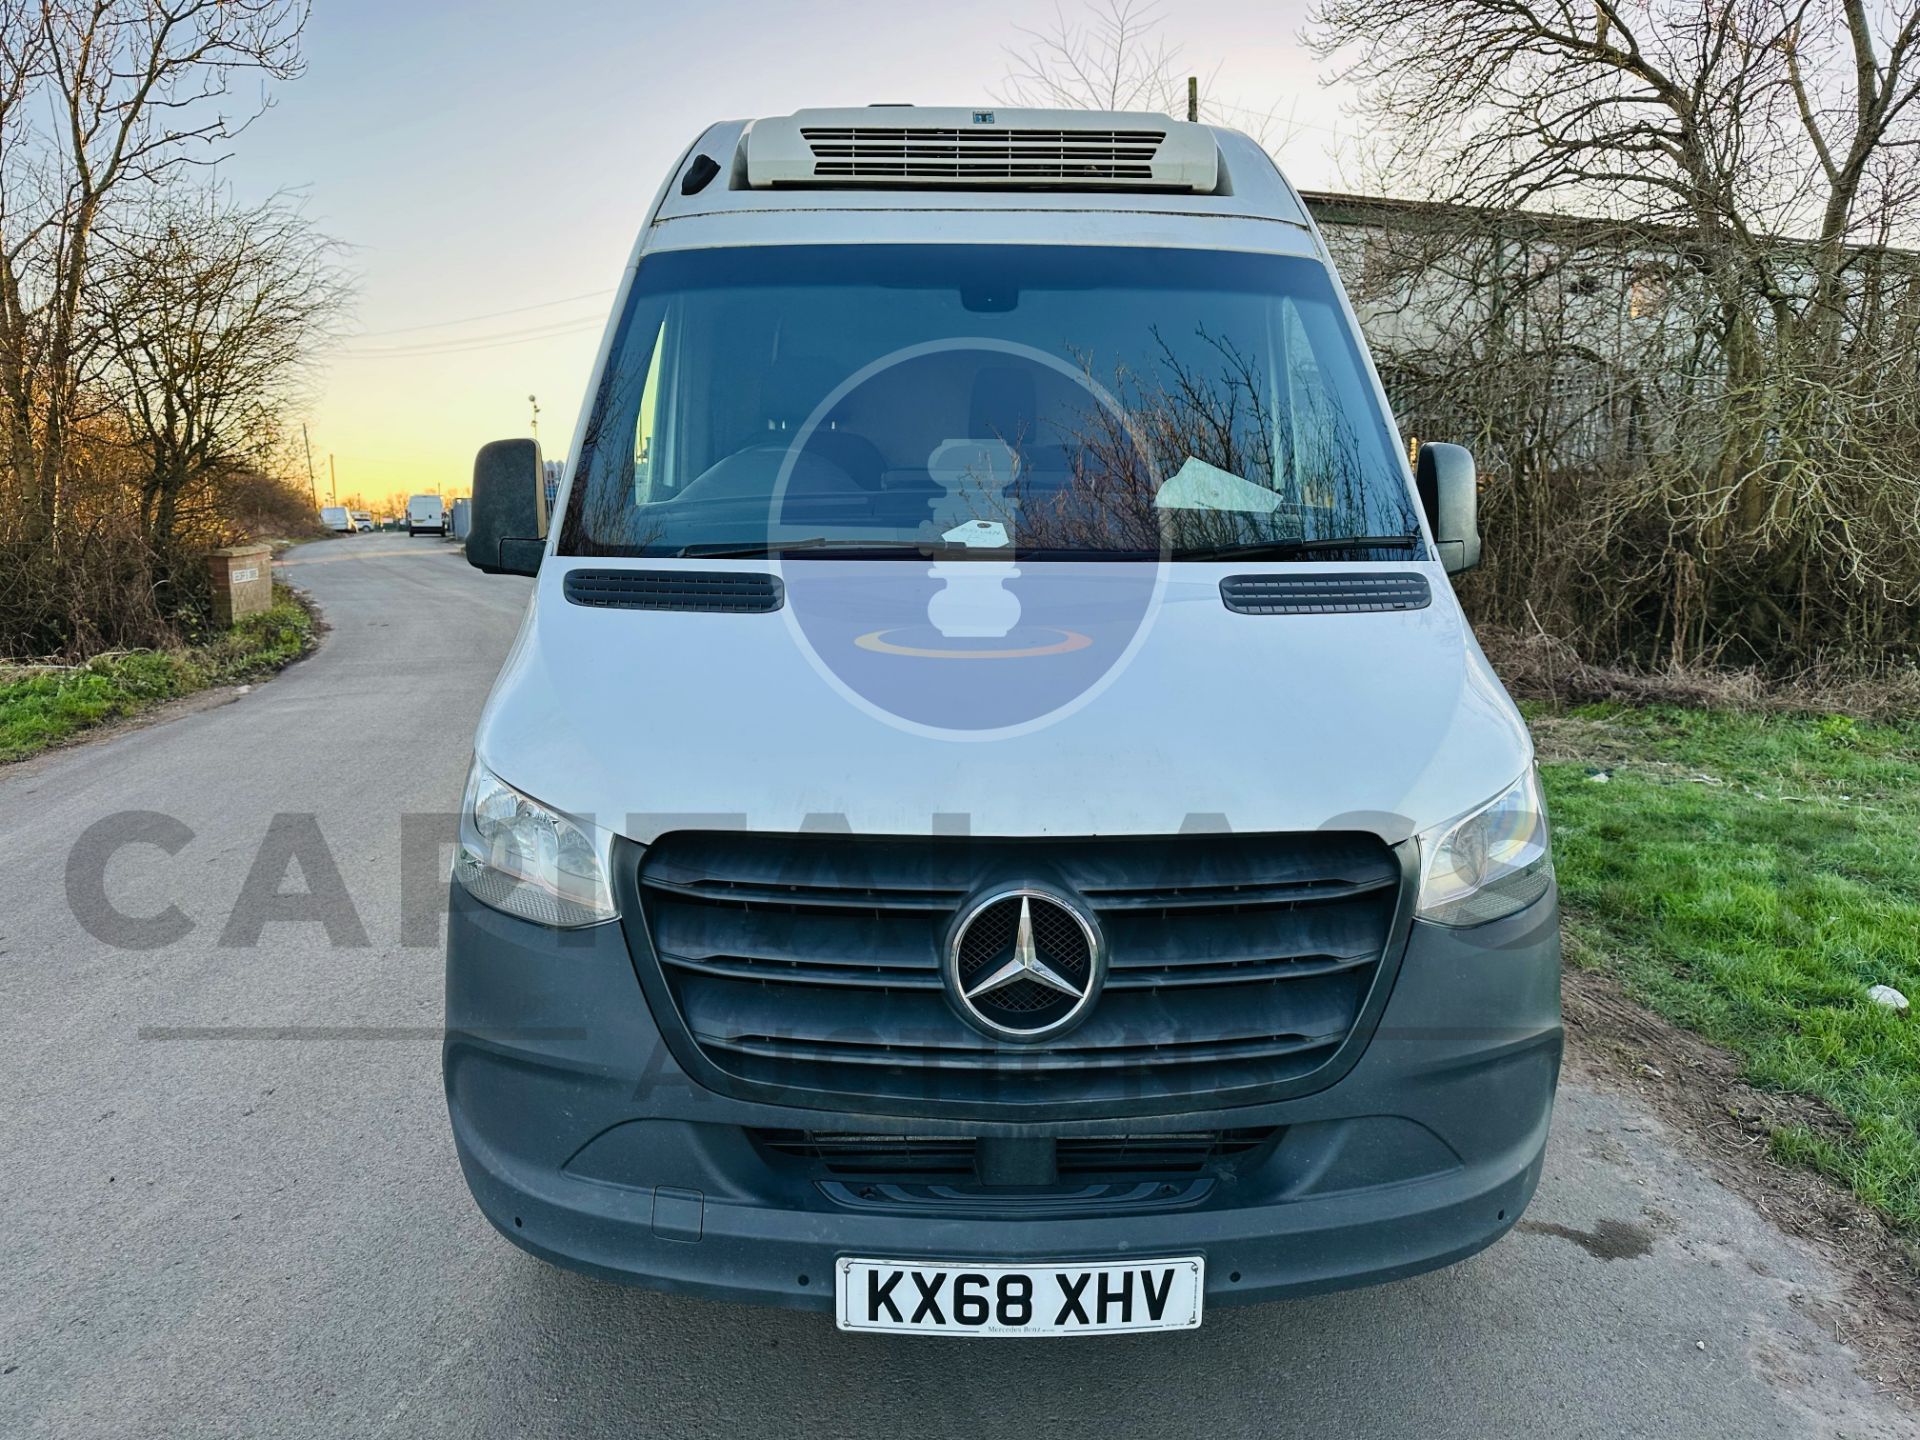 MERCEDES-BENZ SPRINTER 314 CDI *MWB - REFRIGERATED VAN* (2019 - FACELIFT MODEL) *OVERNIGHT STANDBY* - Image 3 of 33